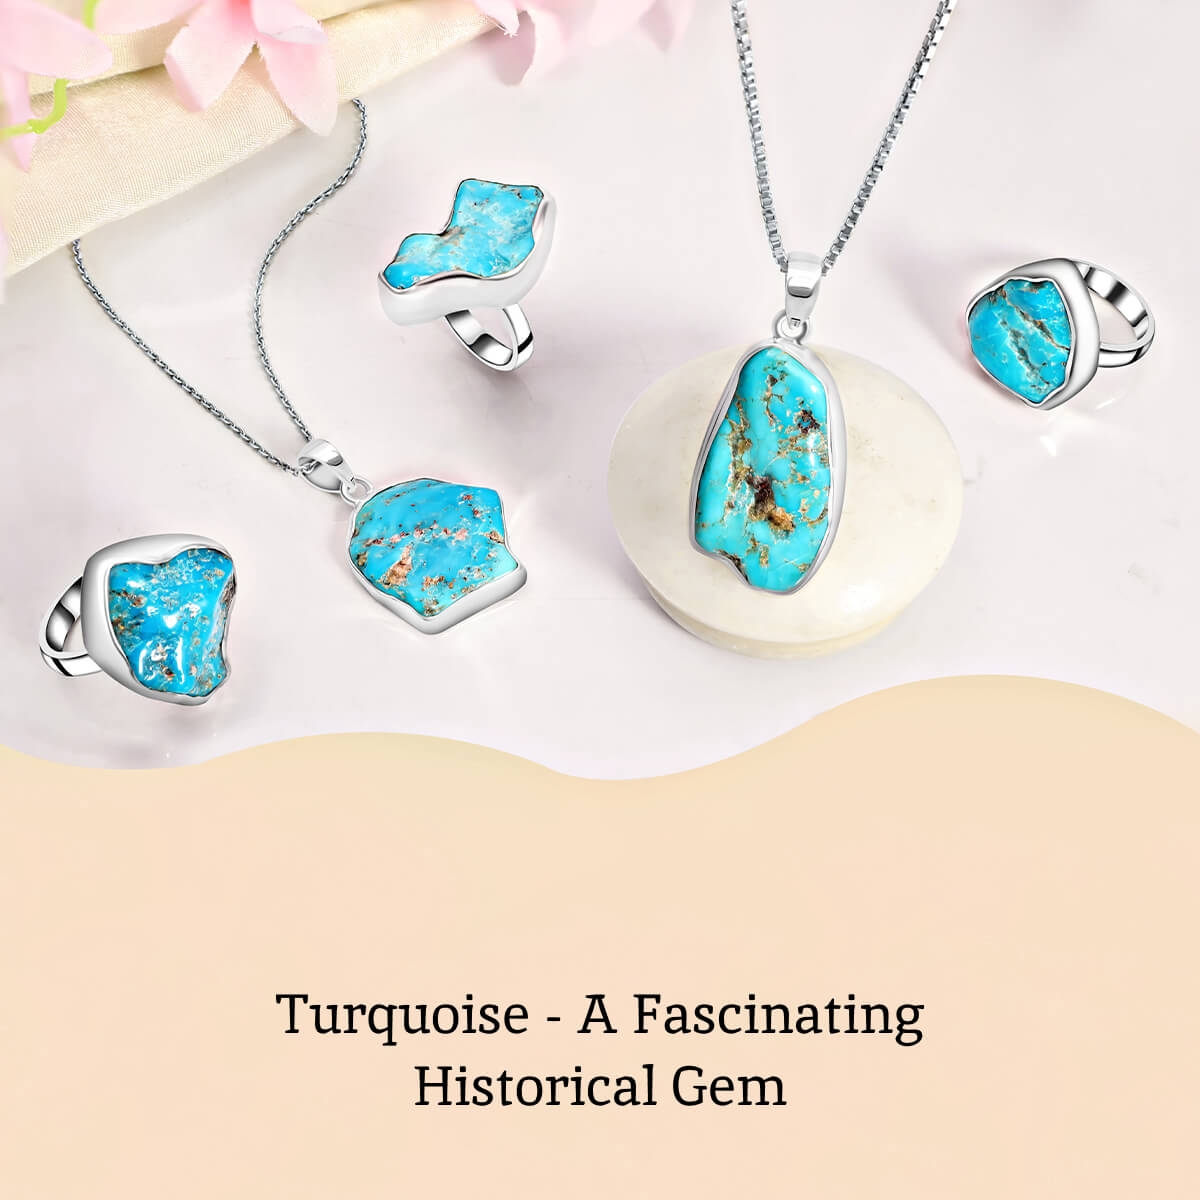 History of Turquoise